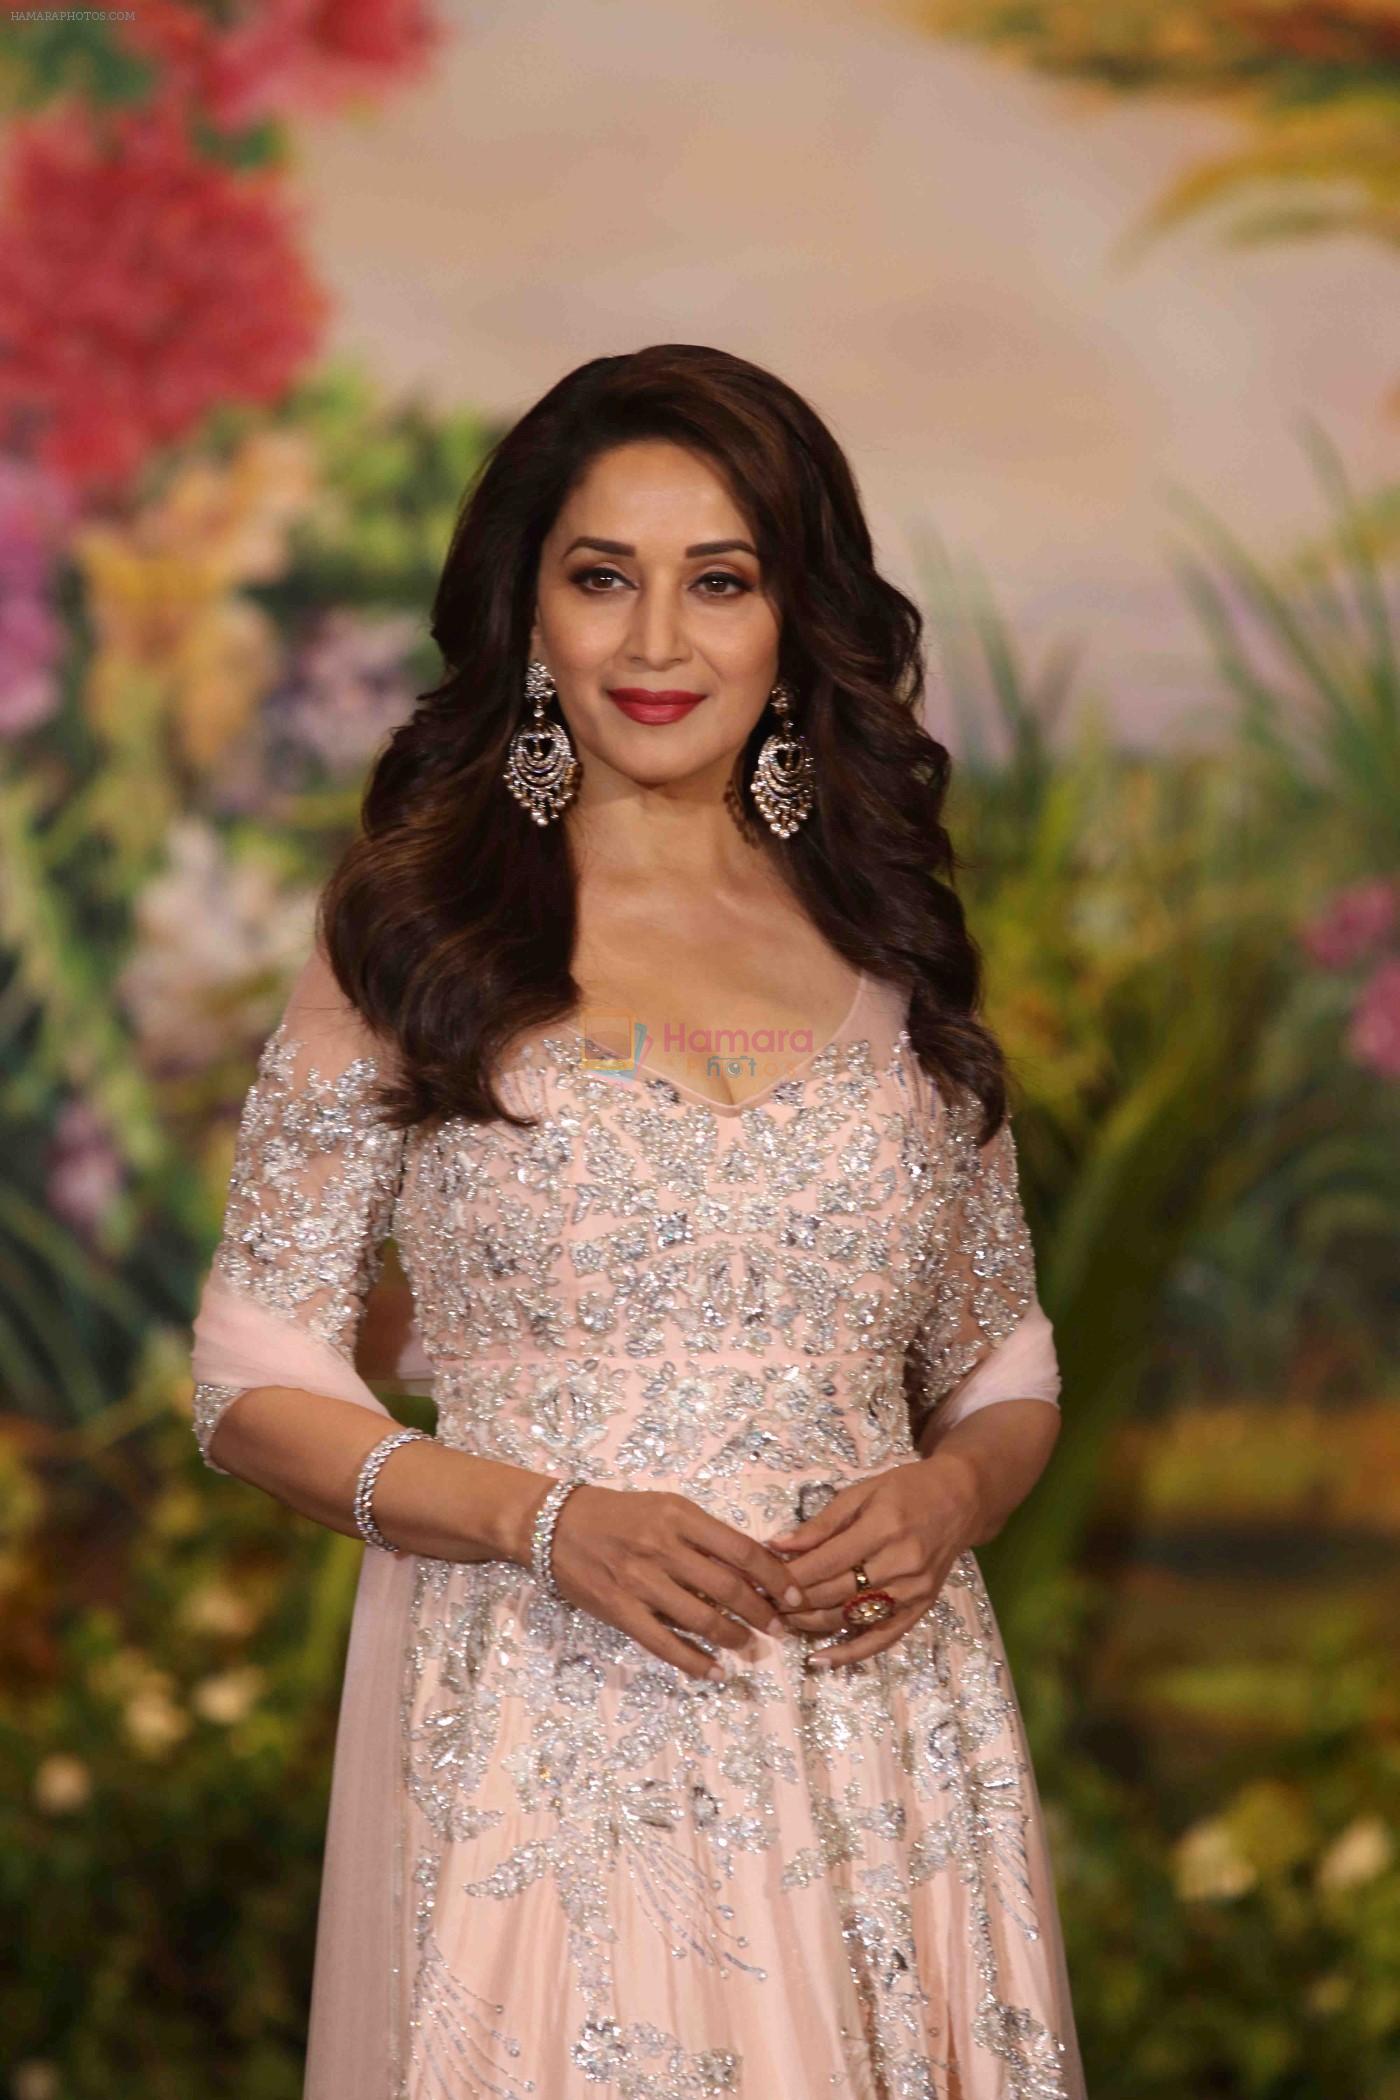 Madhuri Dixit Nene, The 15 August, August 15, Bollywood actress, Mowgli Legend Of The Jungle, Bollywood news, Entertainment news